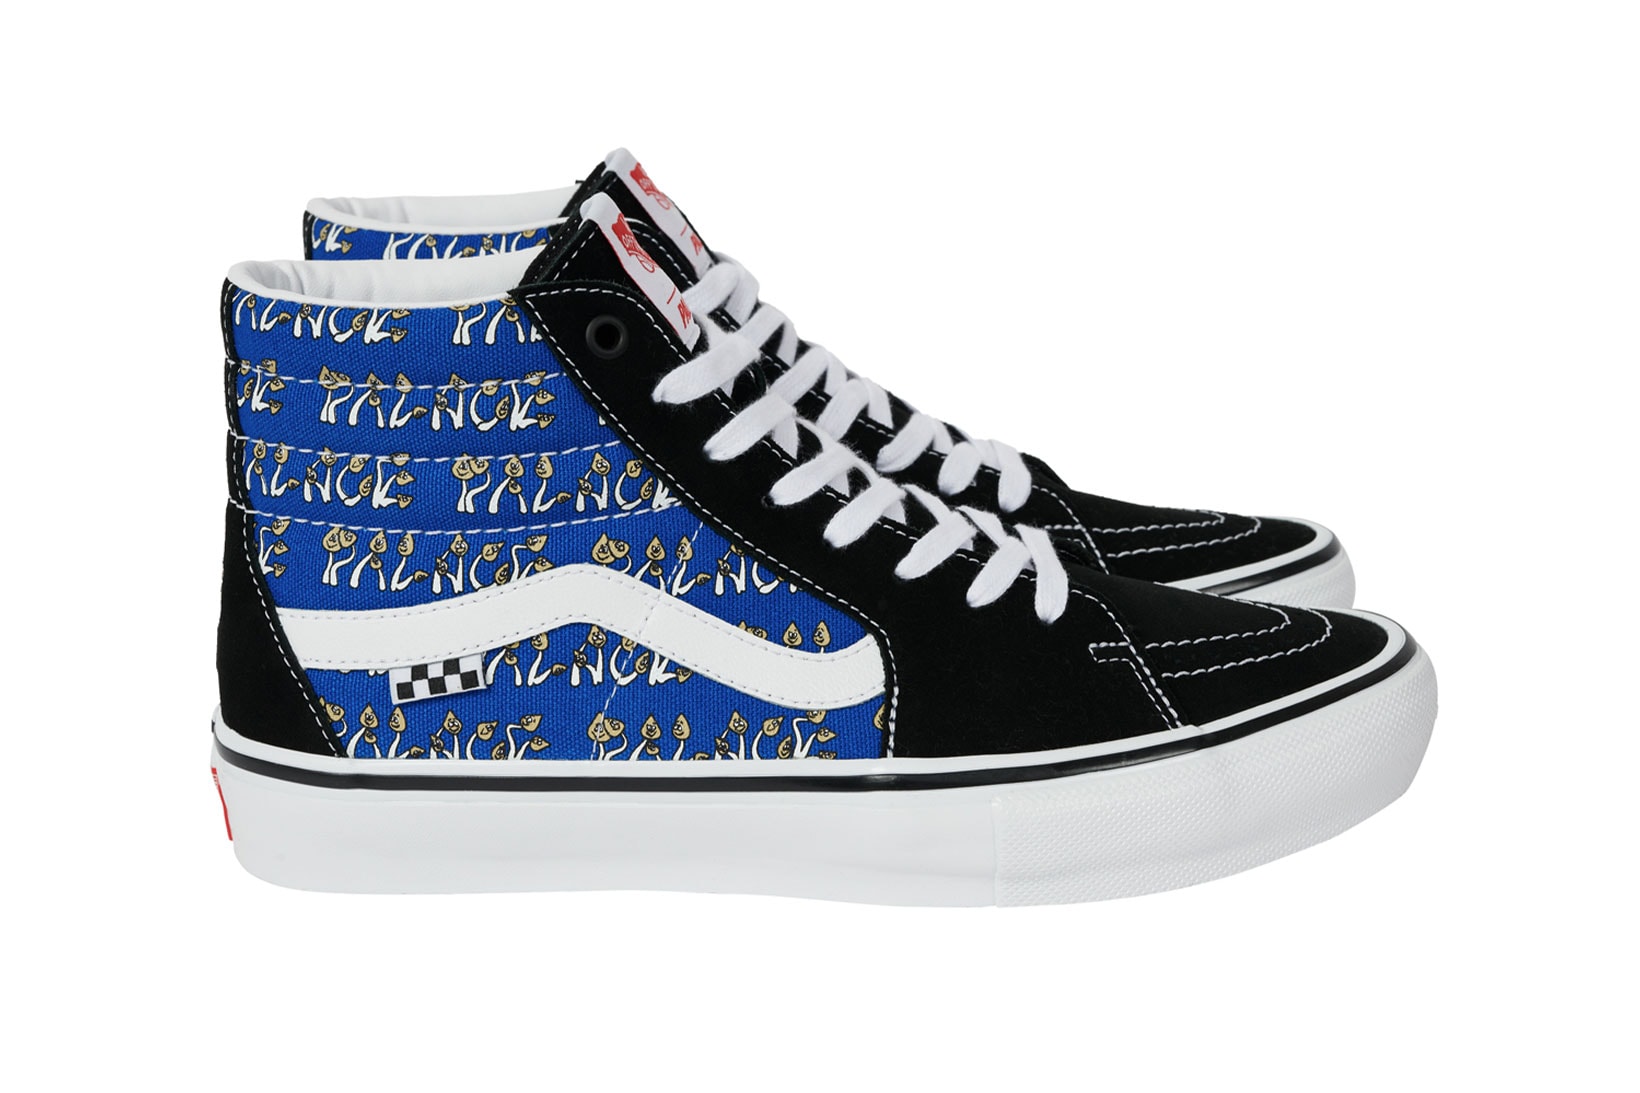 Palace Vans Sk8-Hi Shroom Collection Sneakers Blue Black Laterals Side